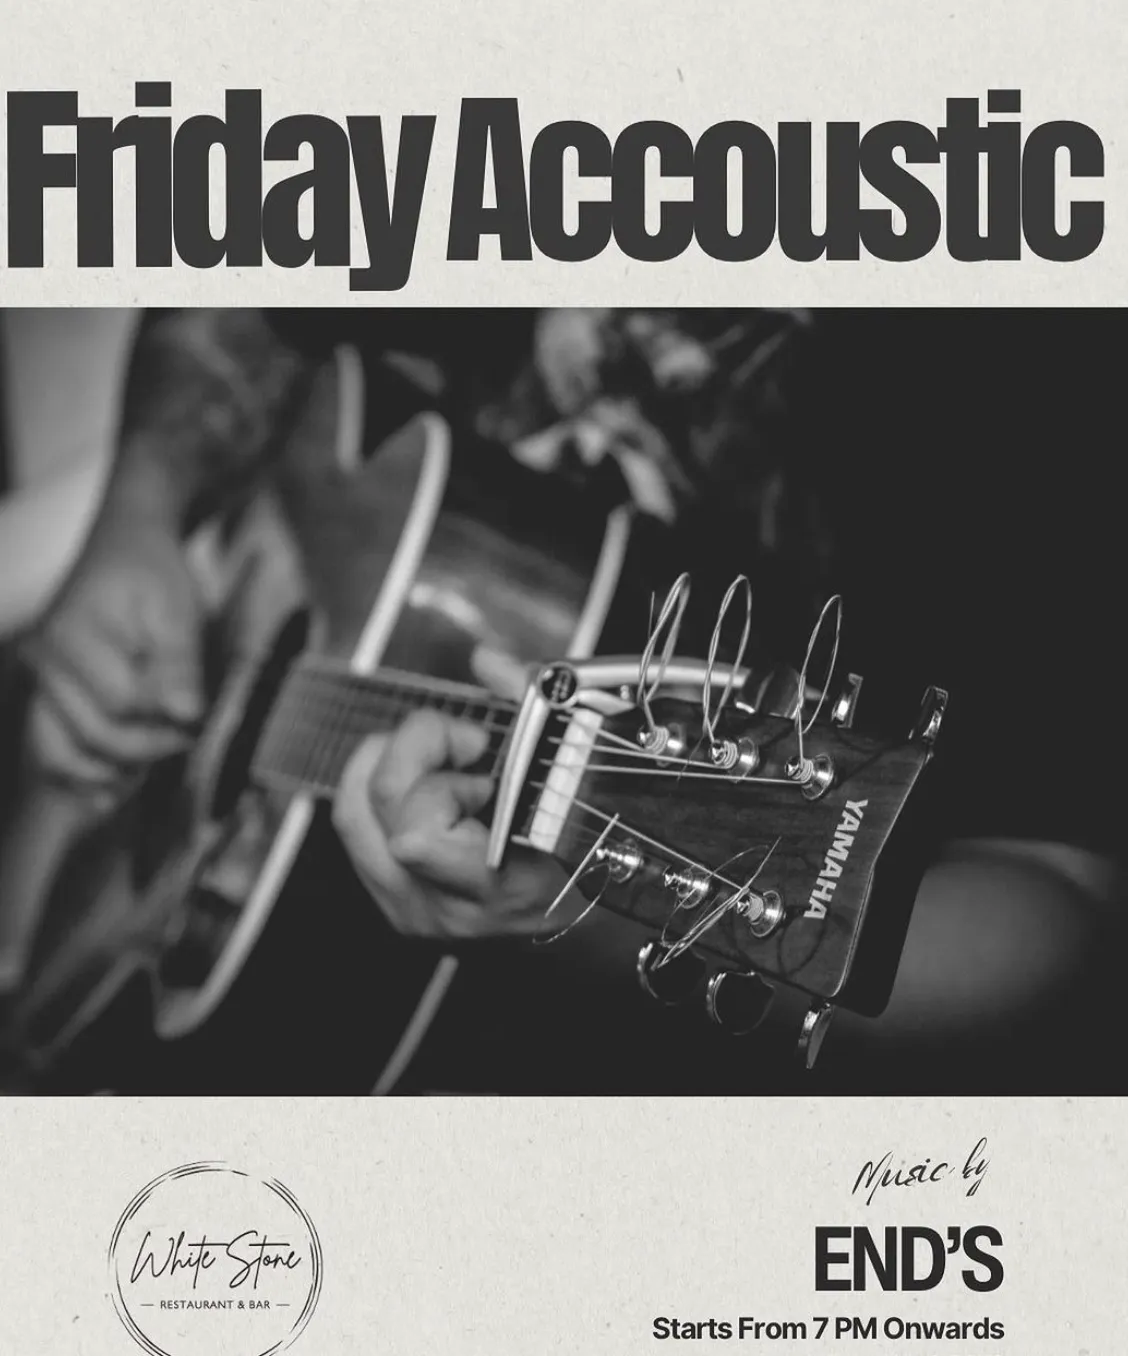 Live music Friday Acoustic 147